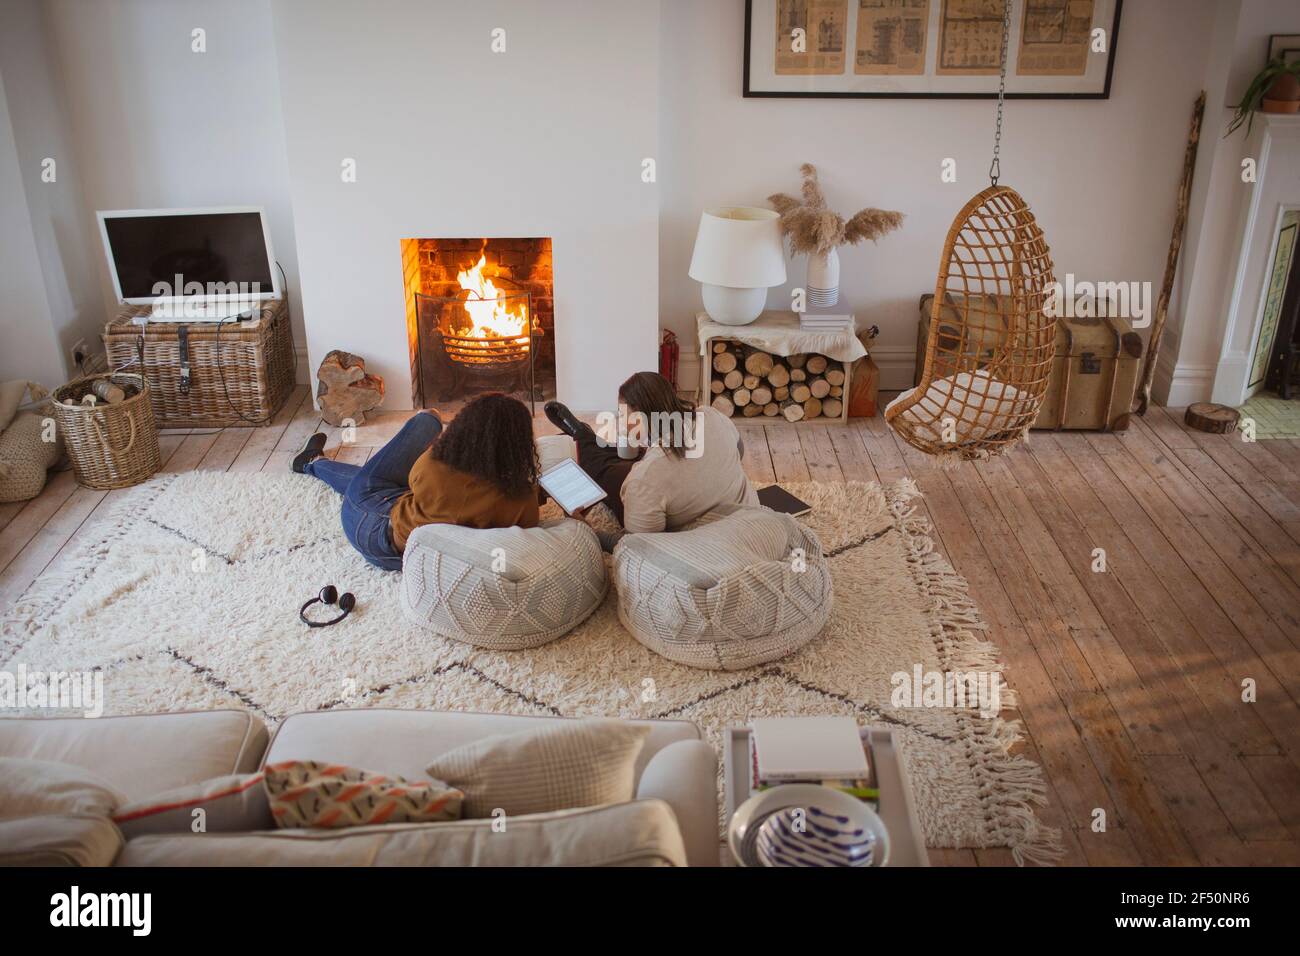 Mother and daughter relaxing with digital tablet by cozy fireplace Stock Photo